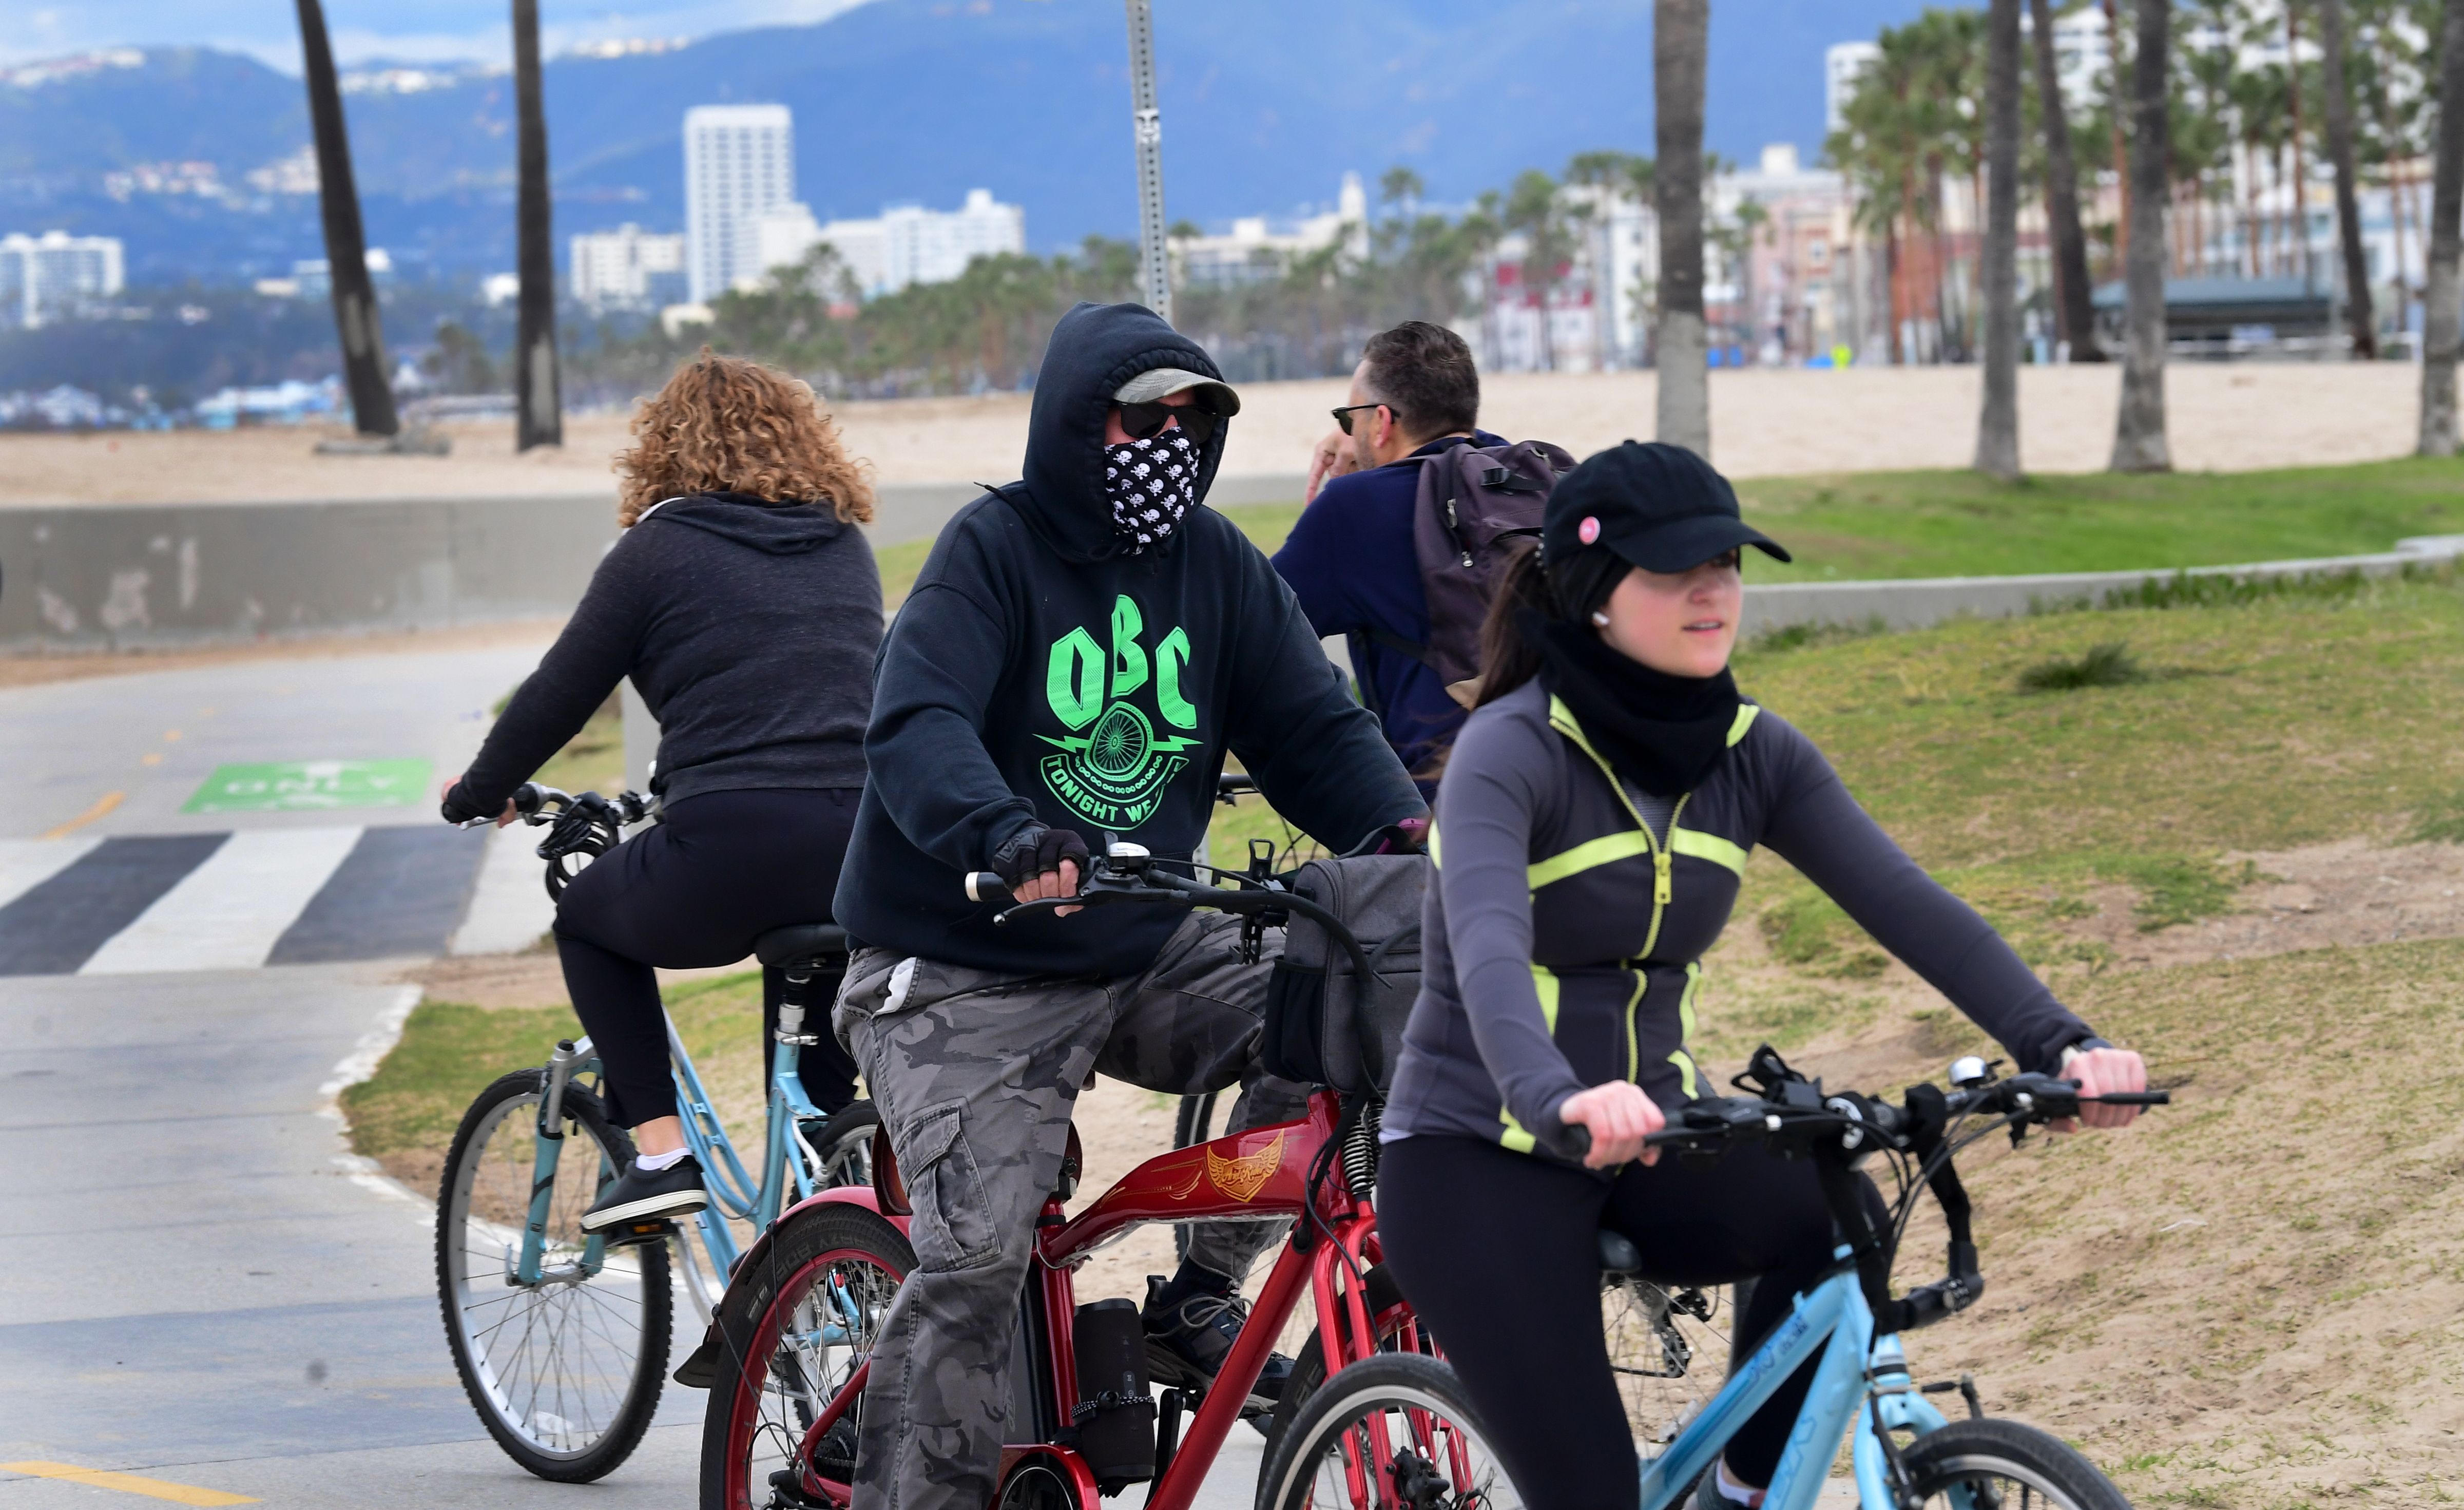 Los Angeles bike trips were up 93% in May 2020 over May 2019, according to data from fitness app Strava. 